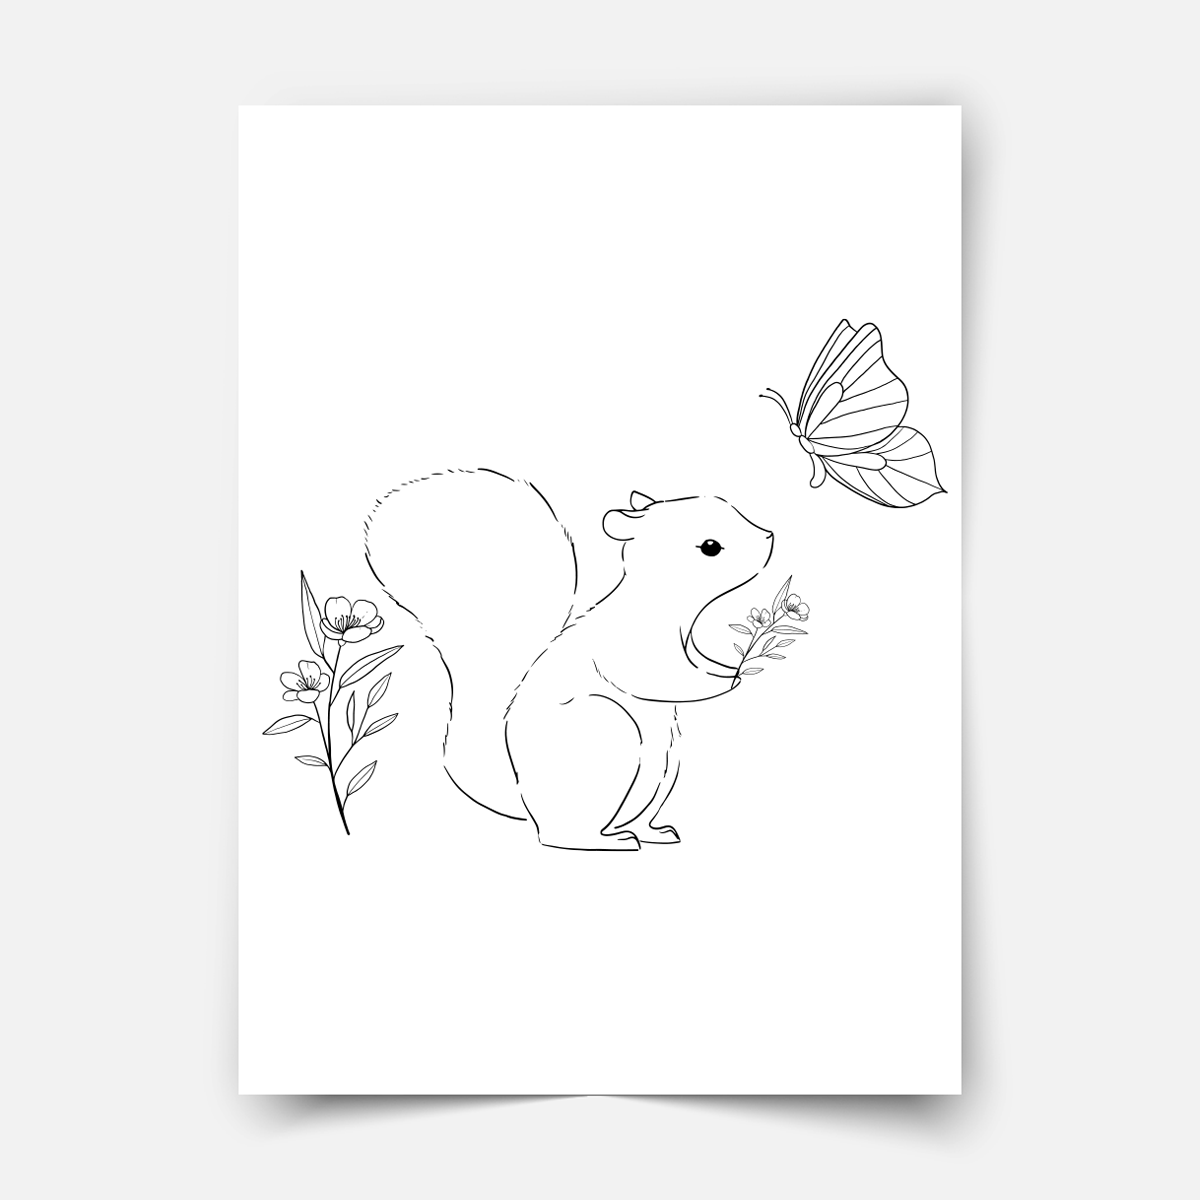 Hand-drawn forest – with butterfly Nursery - Print MICA-MICA friends squirrel